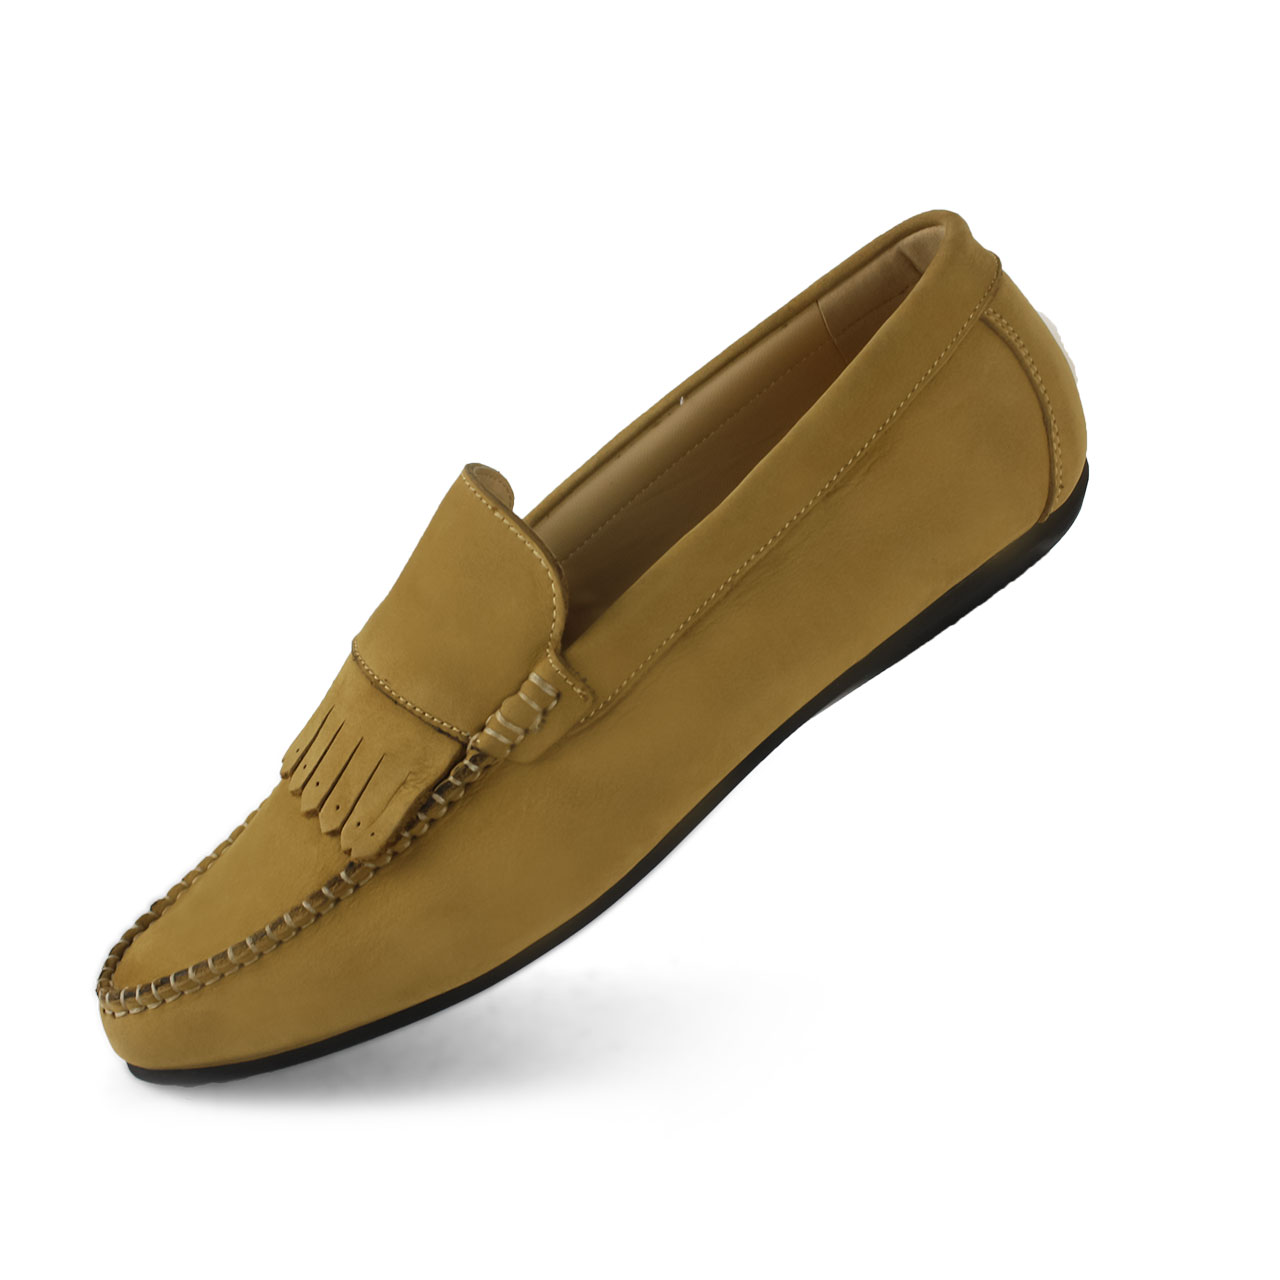 Men's Party Slip On Tassel Casual Loafers